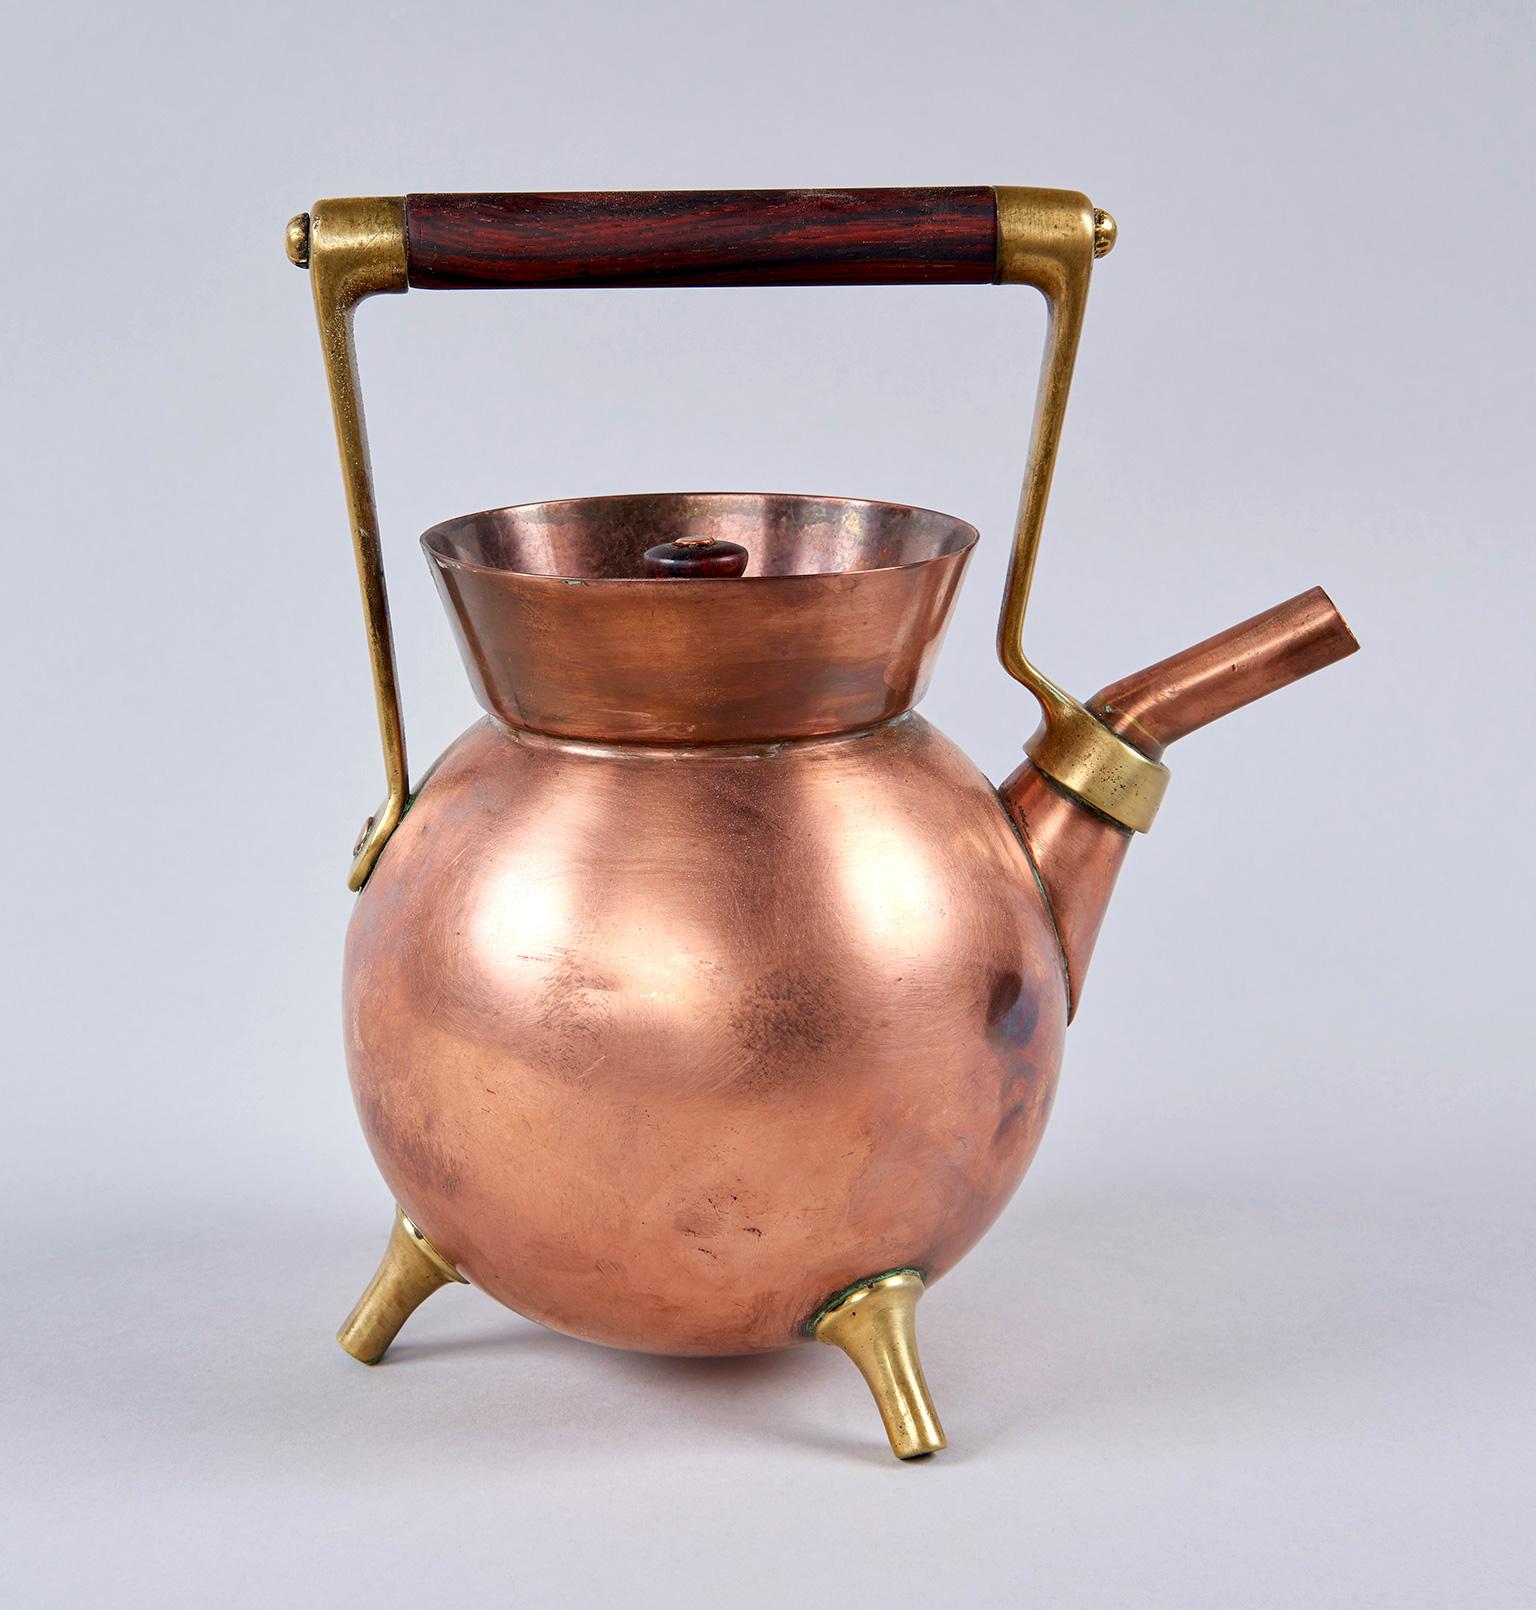 Unusually geometric in form, this extraordinarily inventive copper and brass kettle looks like a Bauhaus thesis project from 1930 but was actually created in England in 1878 by the world's first industrial designer, proto-modernist Dr. Christopher